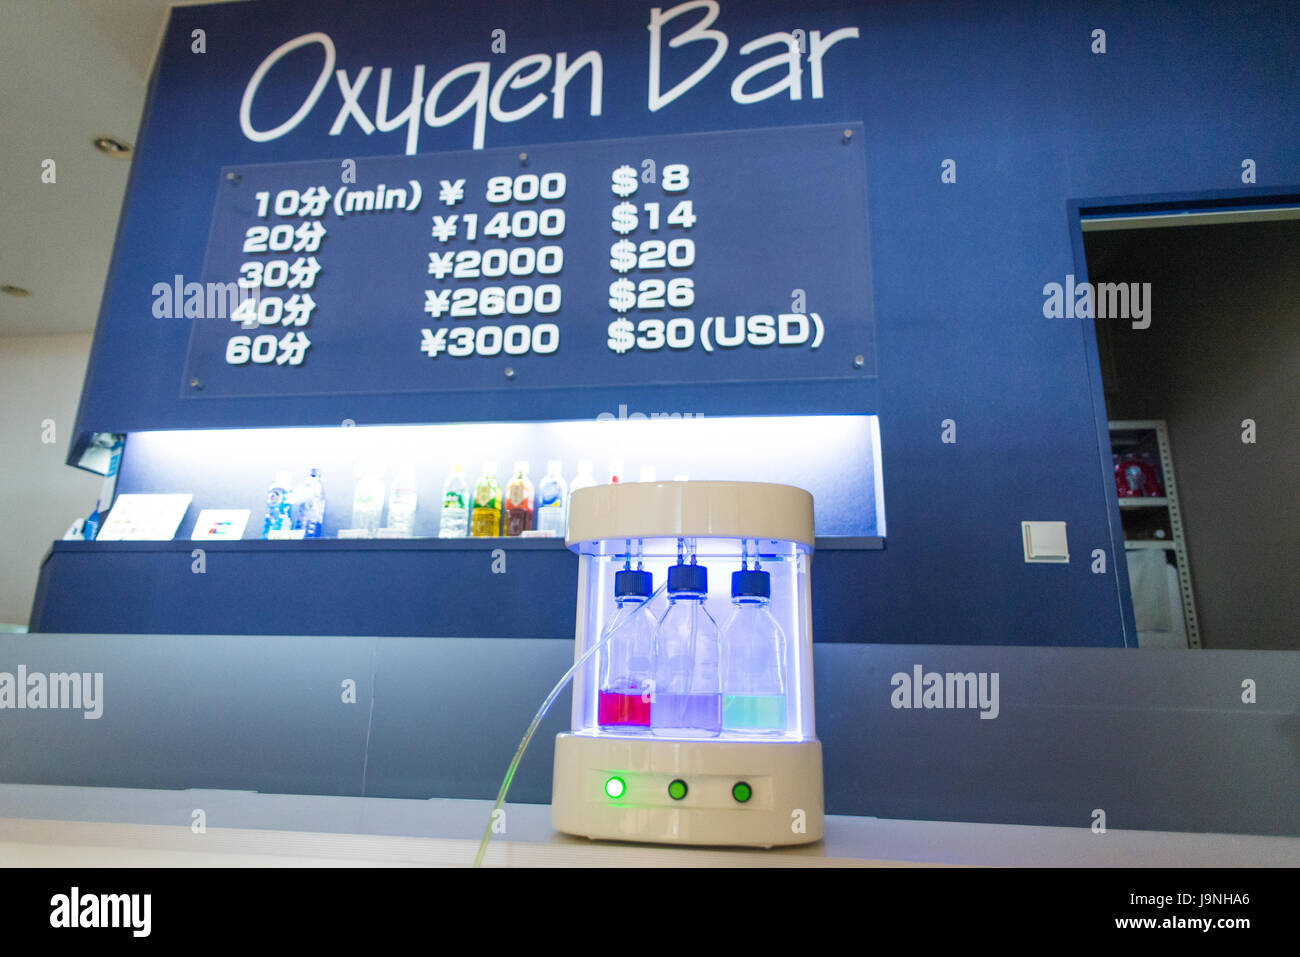 The Oxygen Bar in the Narita, Tokyo airport. Stock Photo